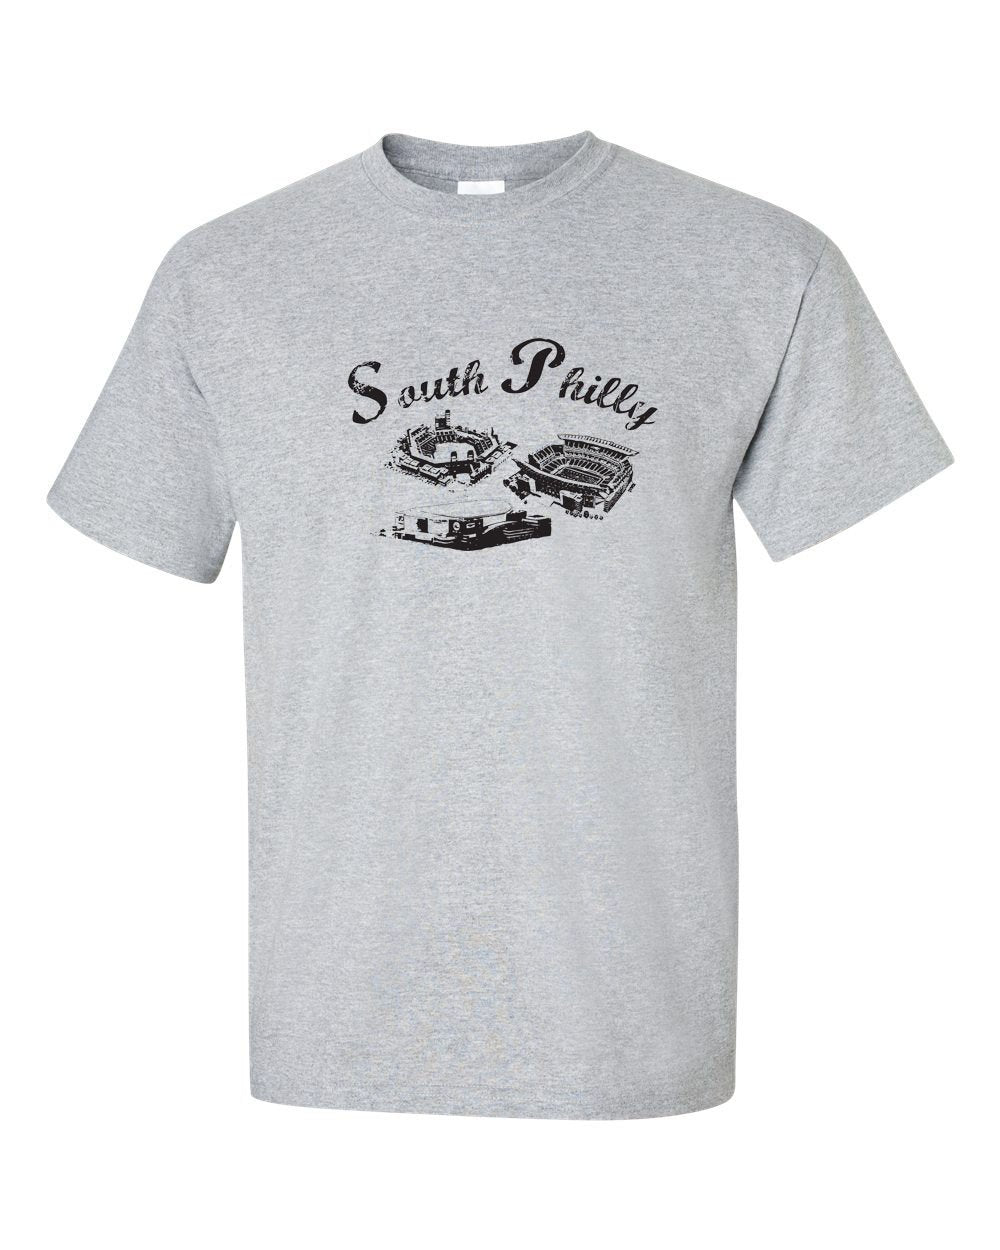 South Philly Mens/Unisex T-Shirt